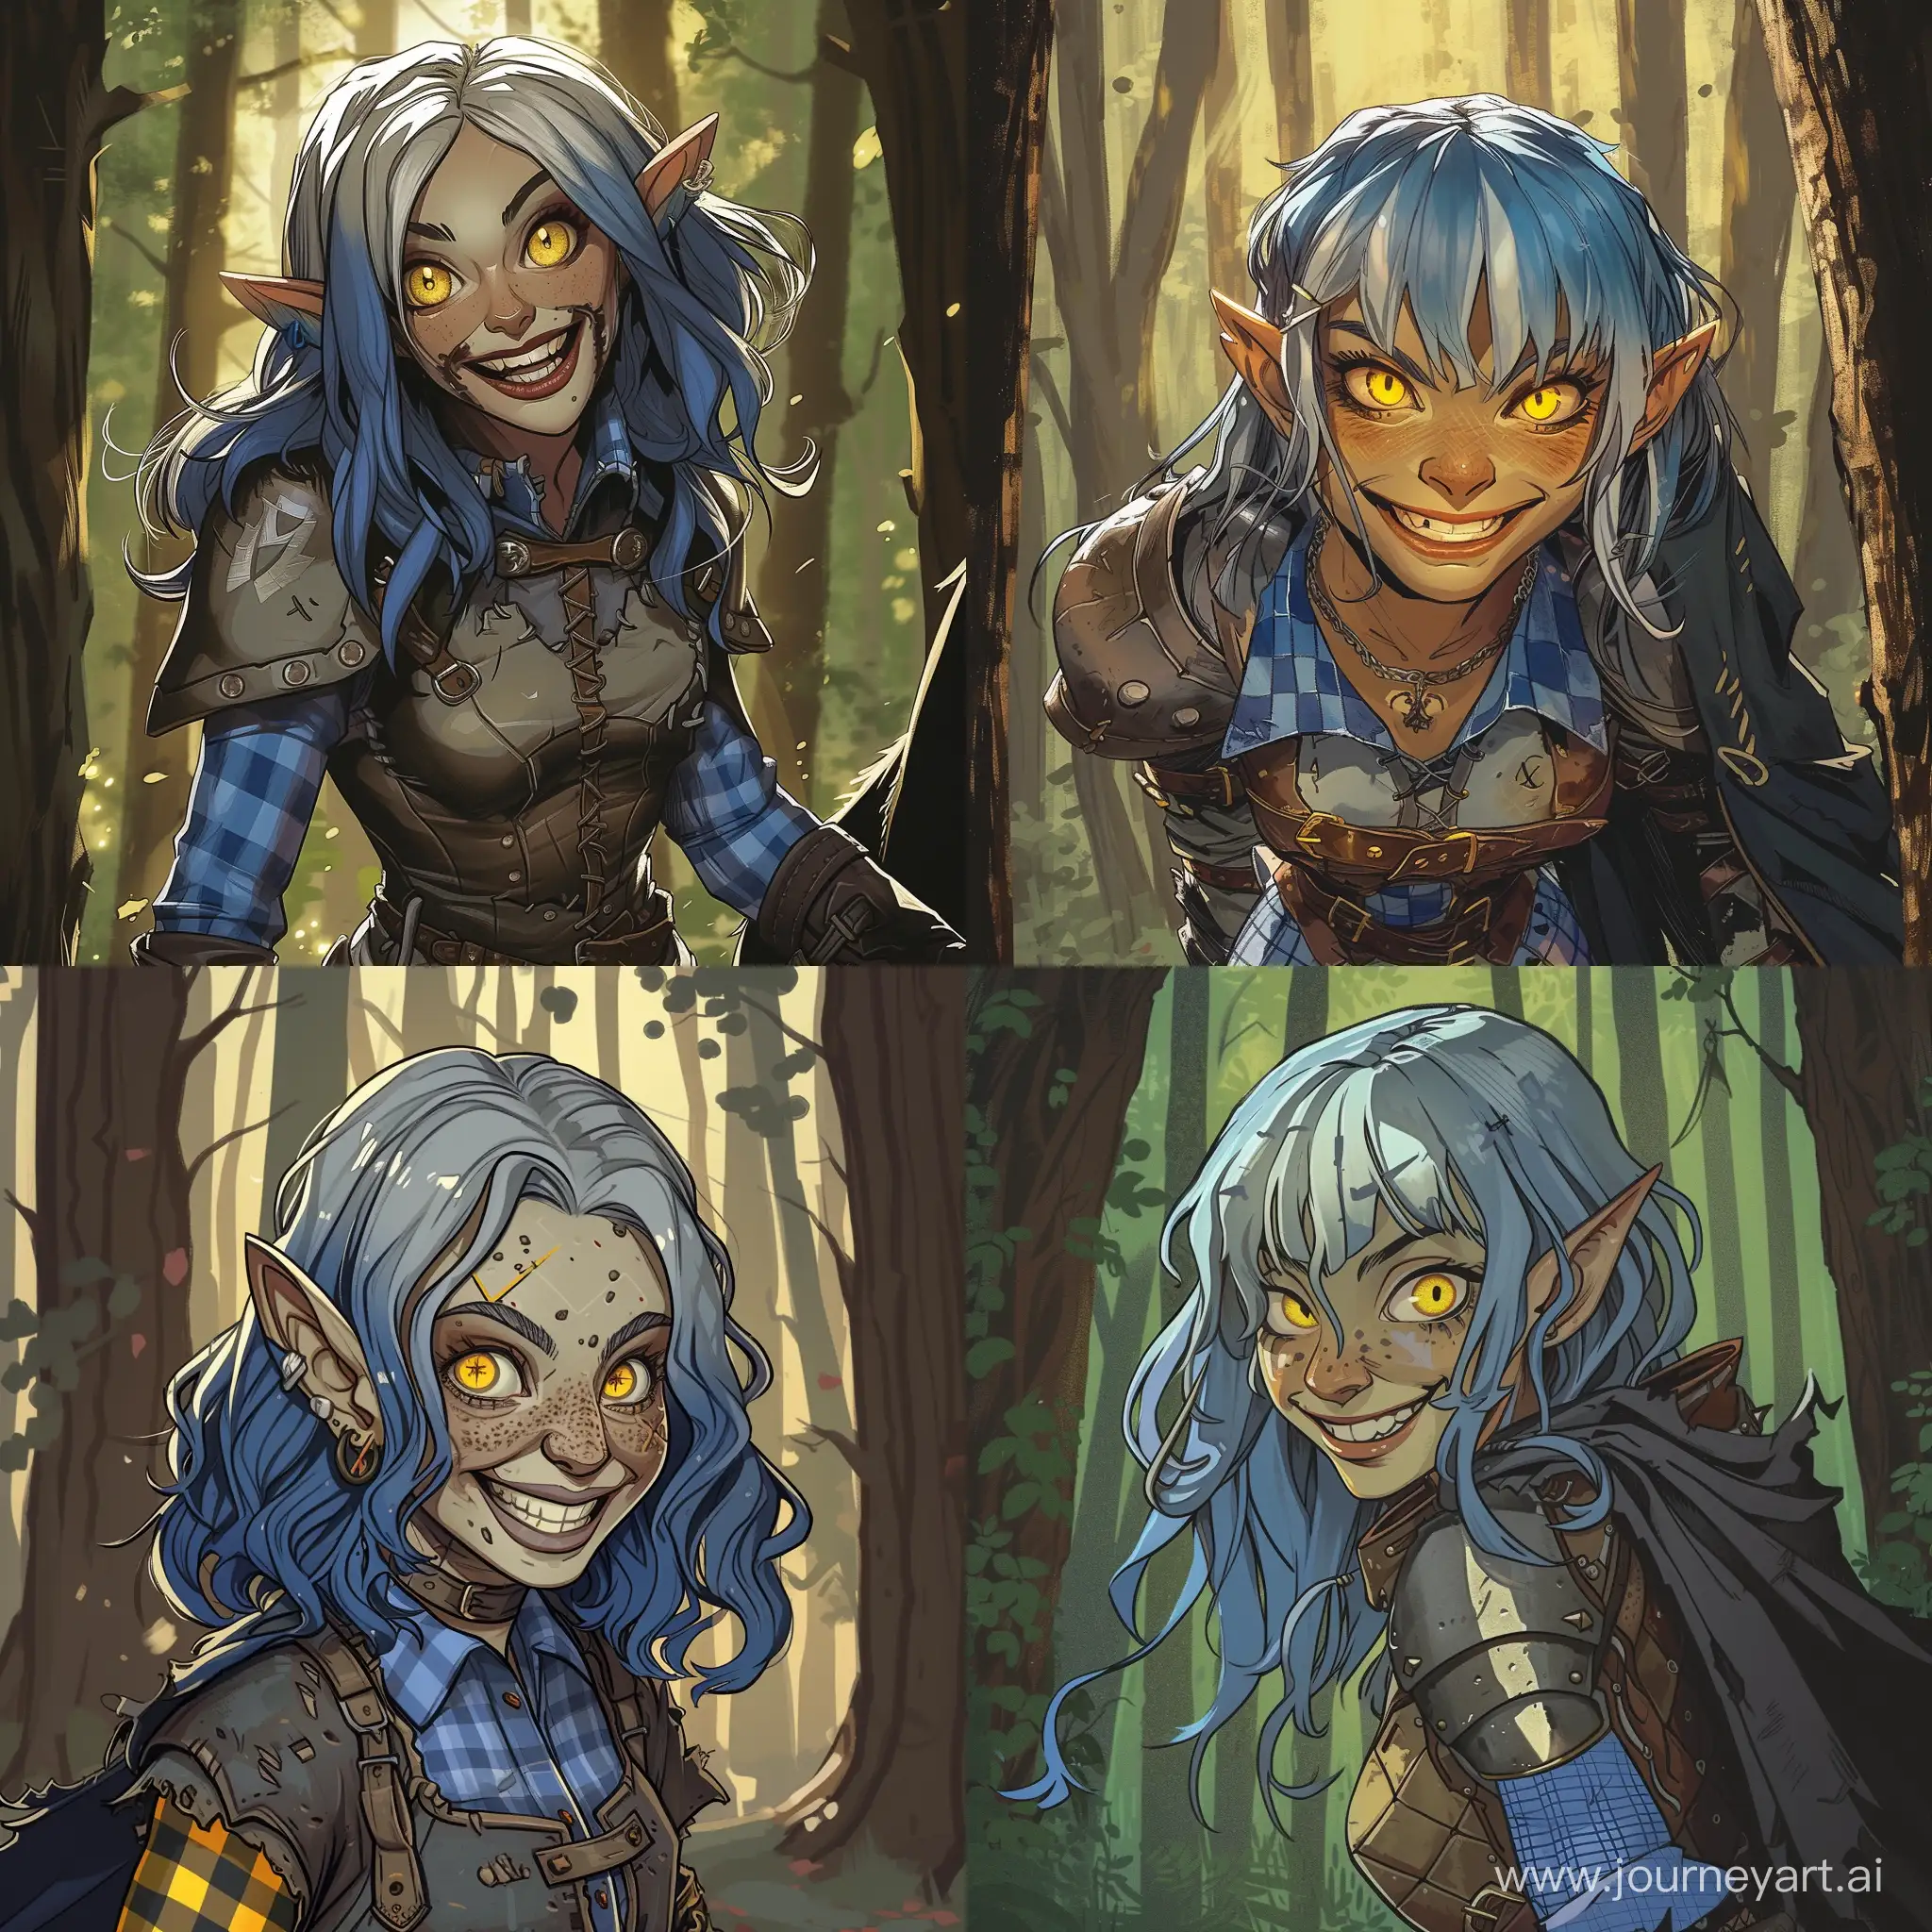 Draw a character from the Dungeons and Dragons universe according to the following description: She is an elf warlock with over the shoulder length blue hair with silver streaks and yellow eyes. She has light beige skin, and crazed happy smile on her young adult face.
This woman is dressed in a leather armor with blue checkered shirt underneath. There is a black cloak behind her back.
She is walking trough the woods searching for an adventure